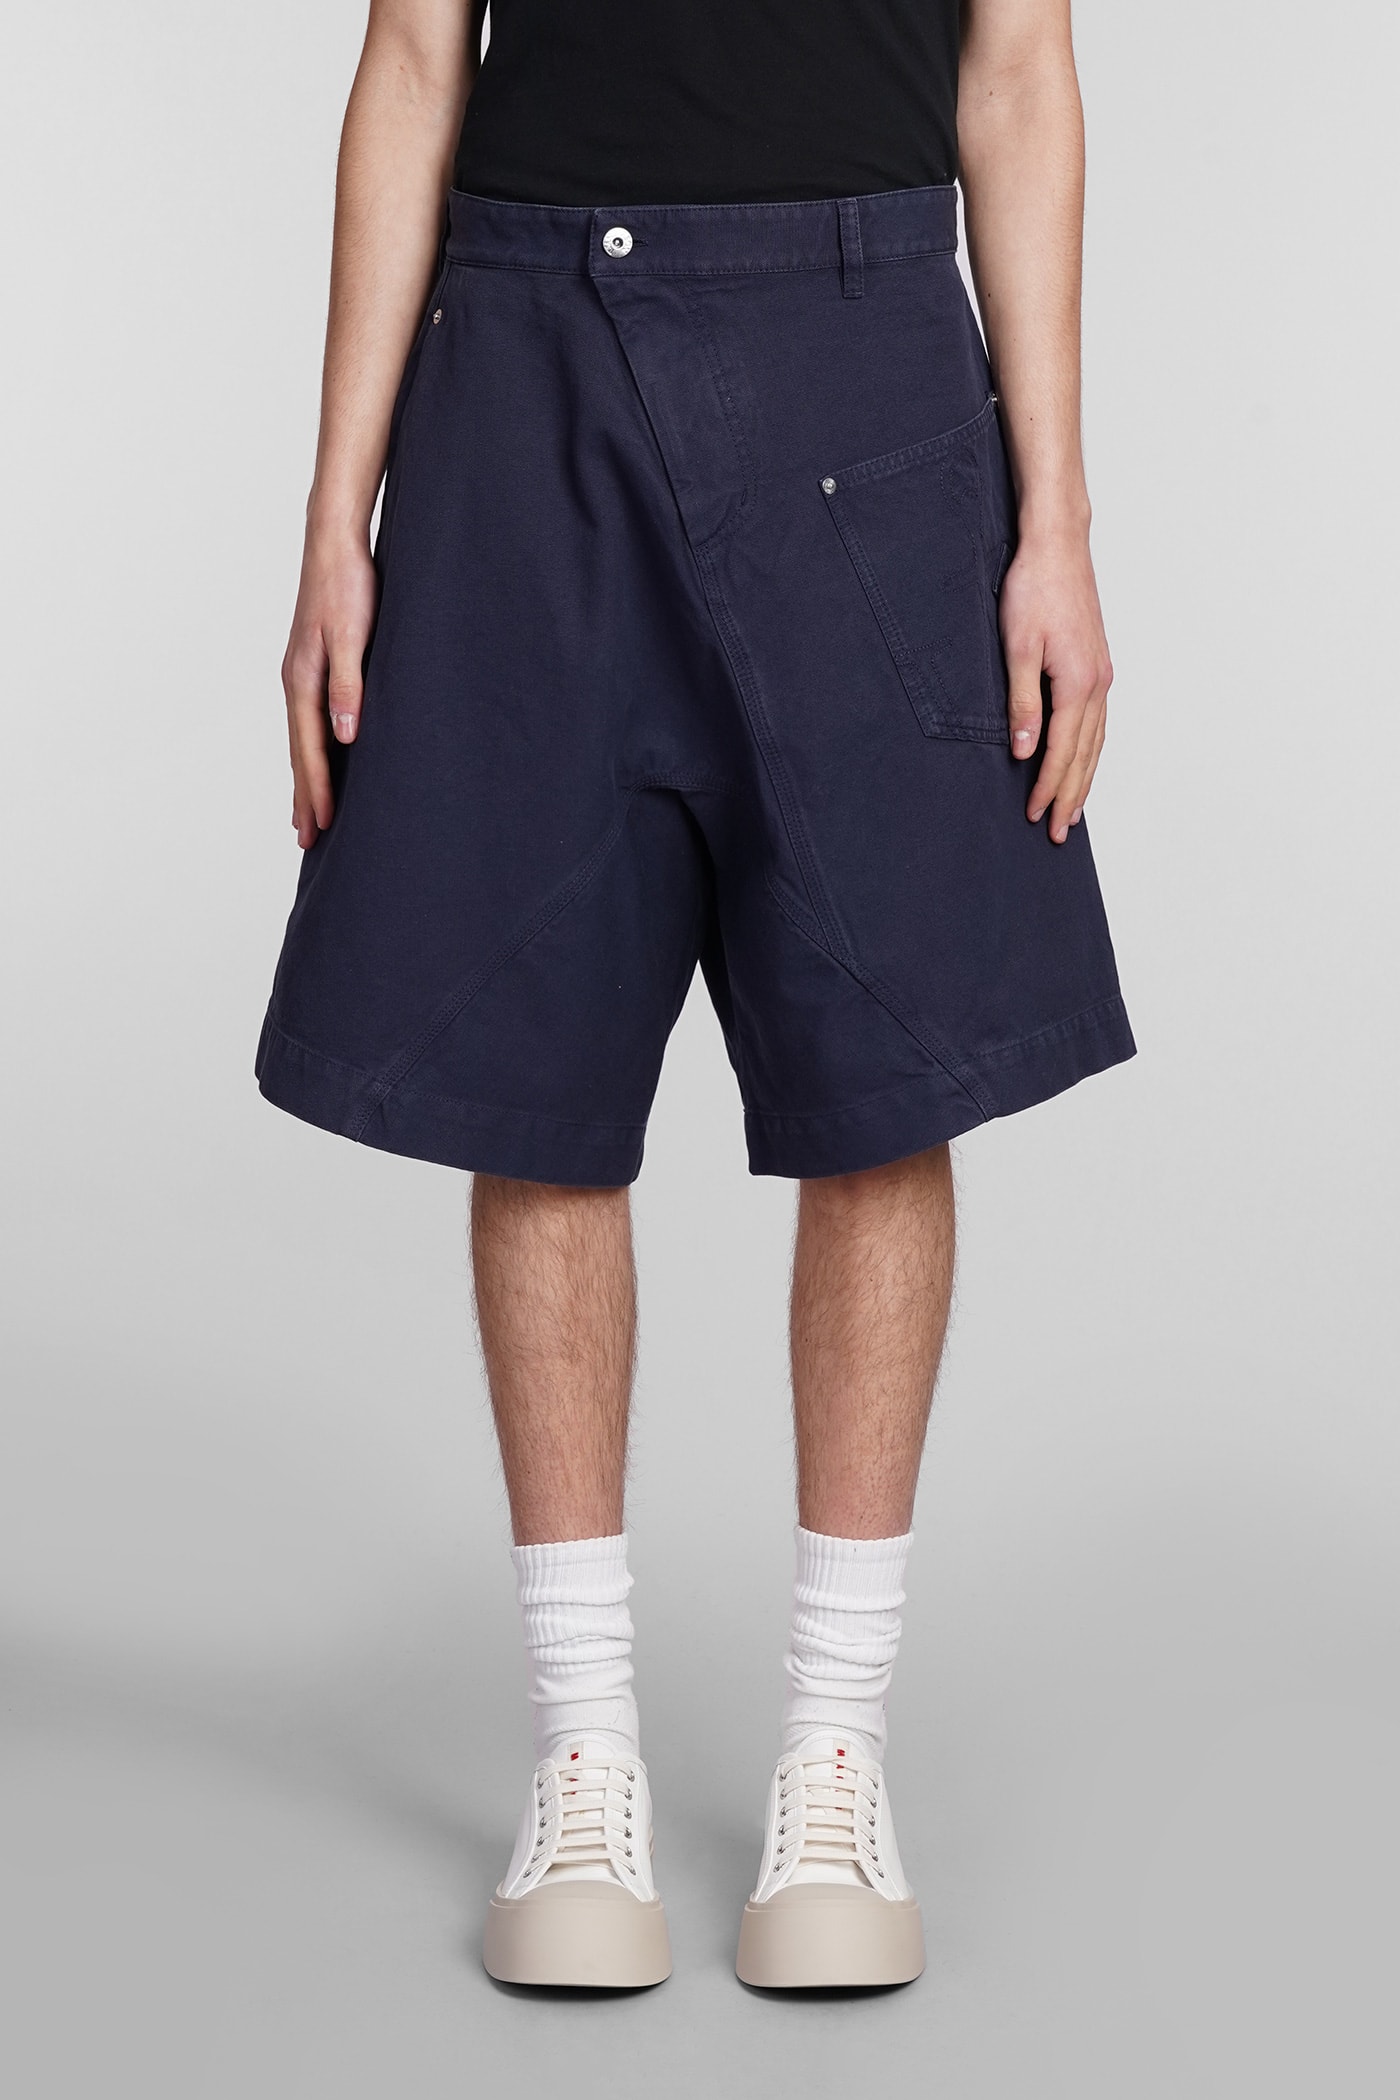 Jw Anderson Shorts In Blue Cotton